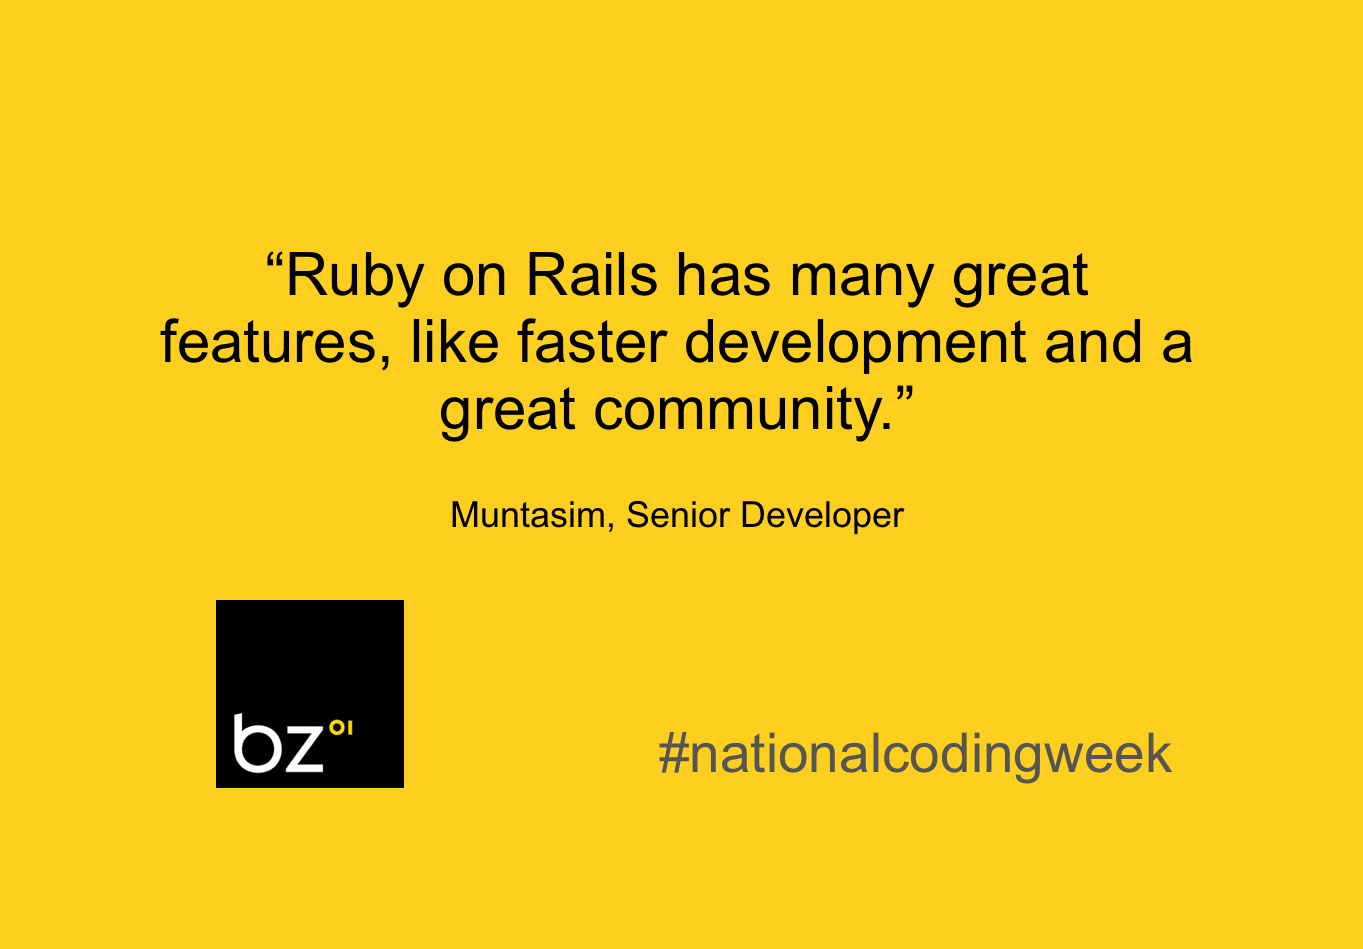 "Ruby on Rails has many great features, like faster development and a great community."